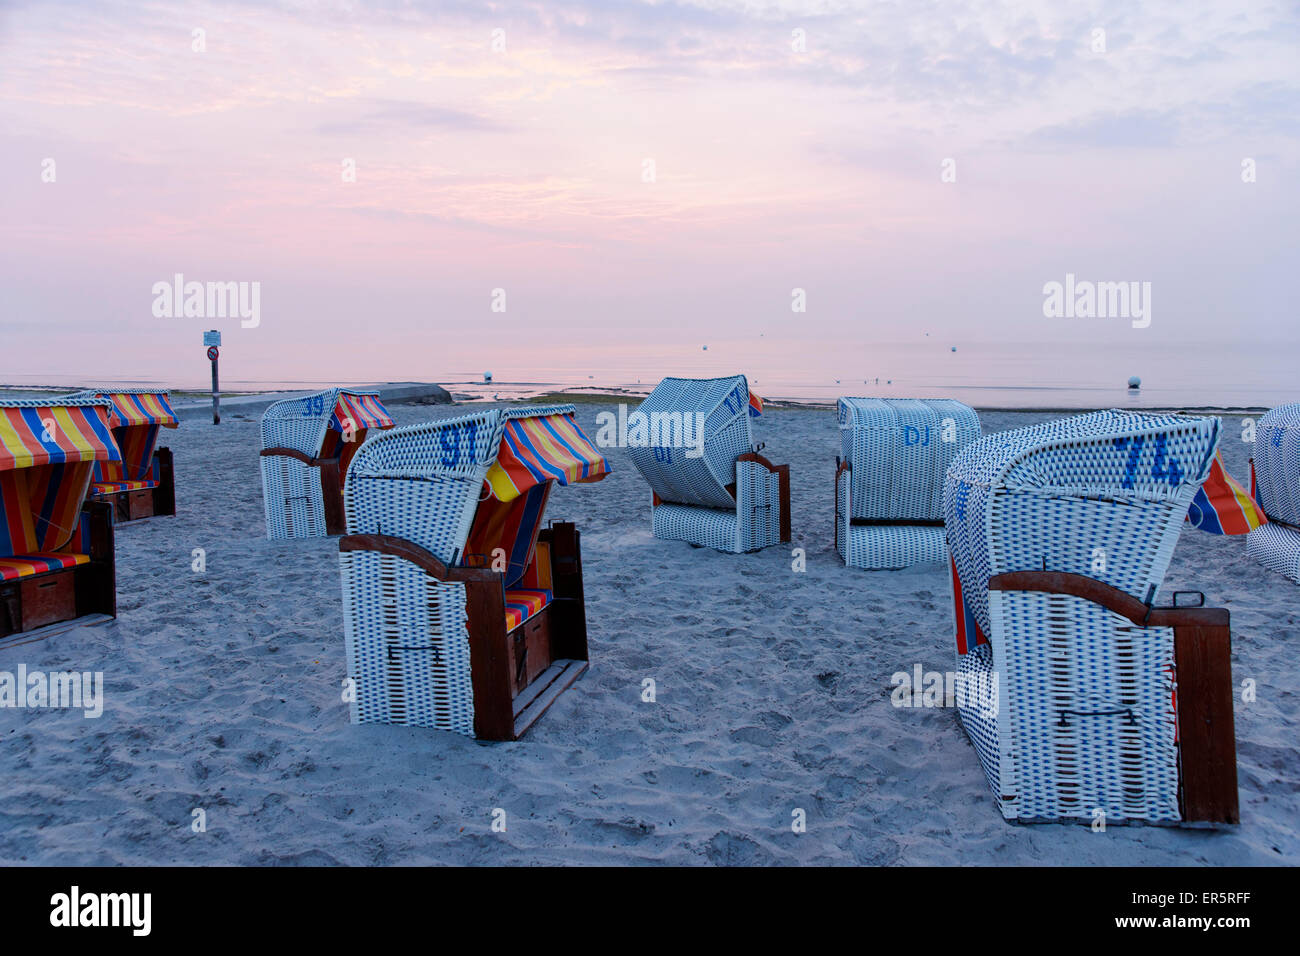 Hooded beach chairs on the beach at sunset, Baltic sea, Groemitz, Schleswig-Holstein, Germany Stock Photo